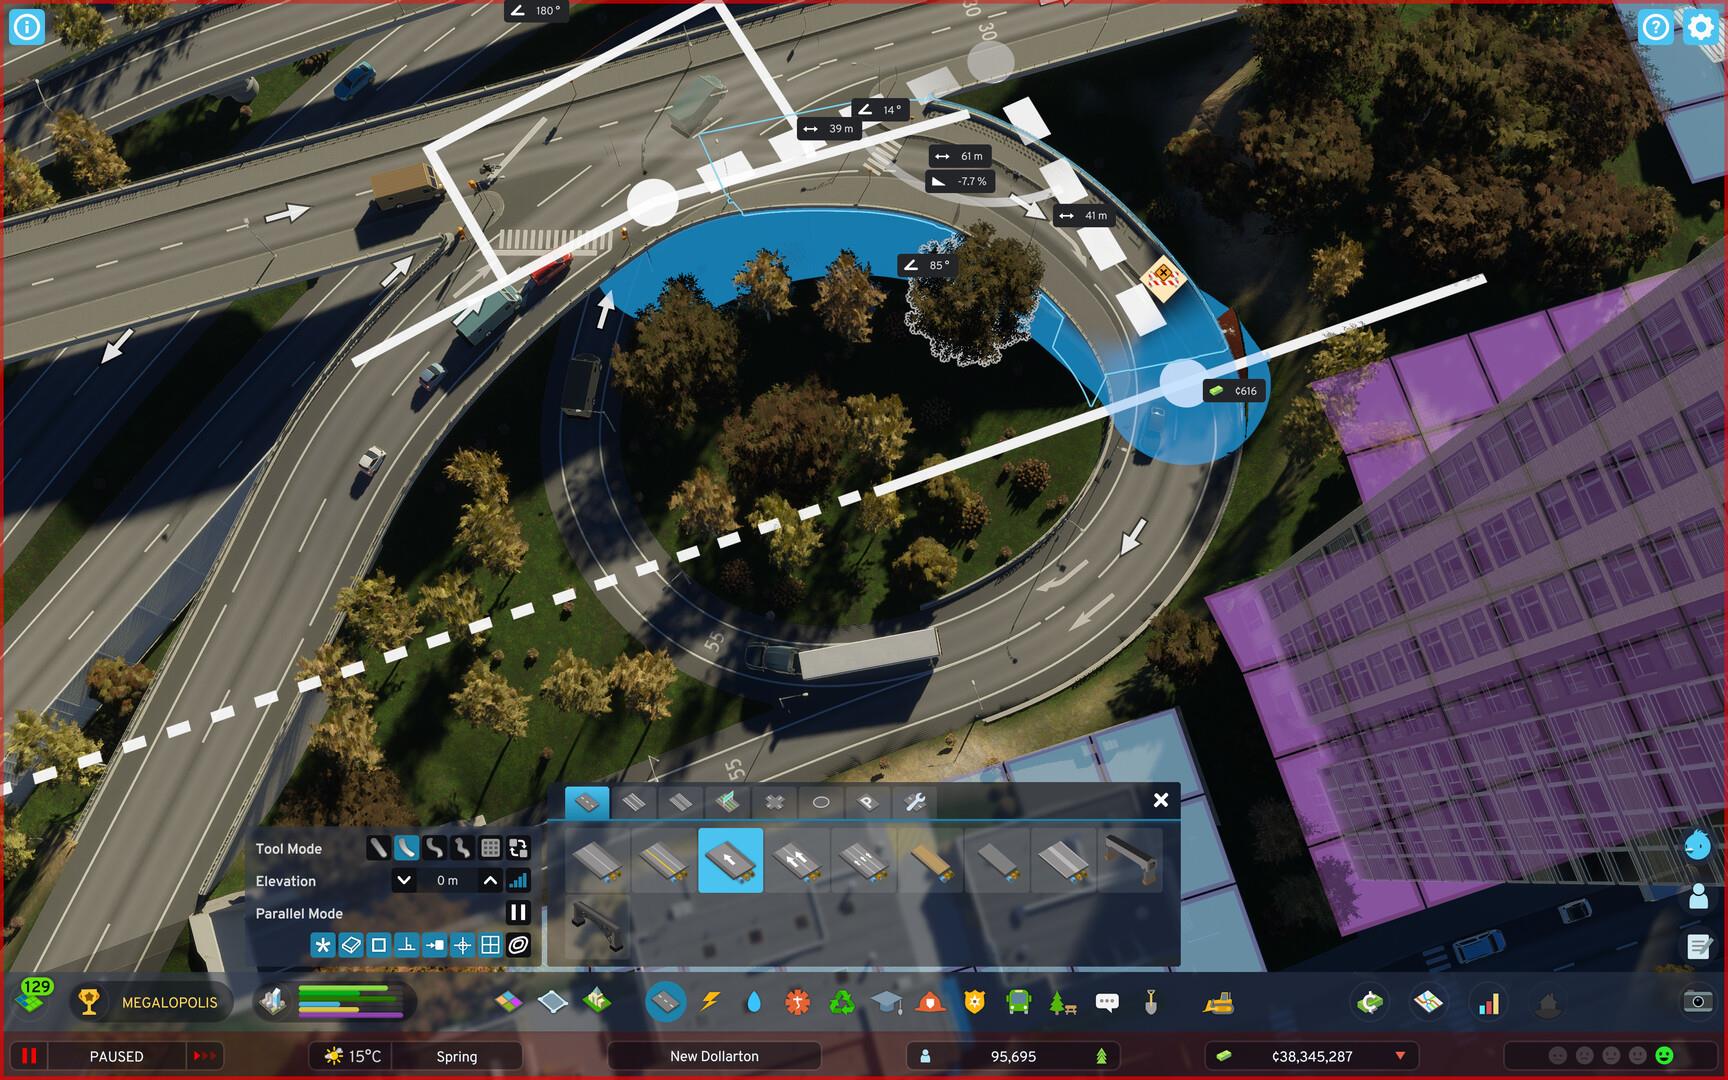 Cities: Skylines 2 review: Building a better sequel